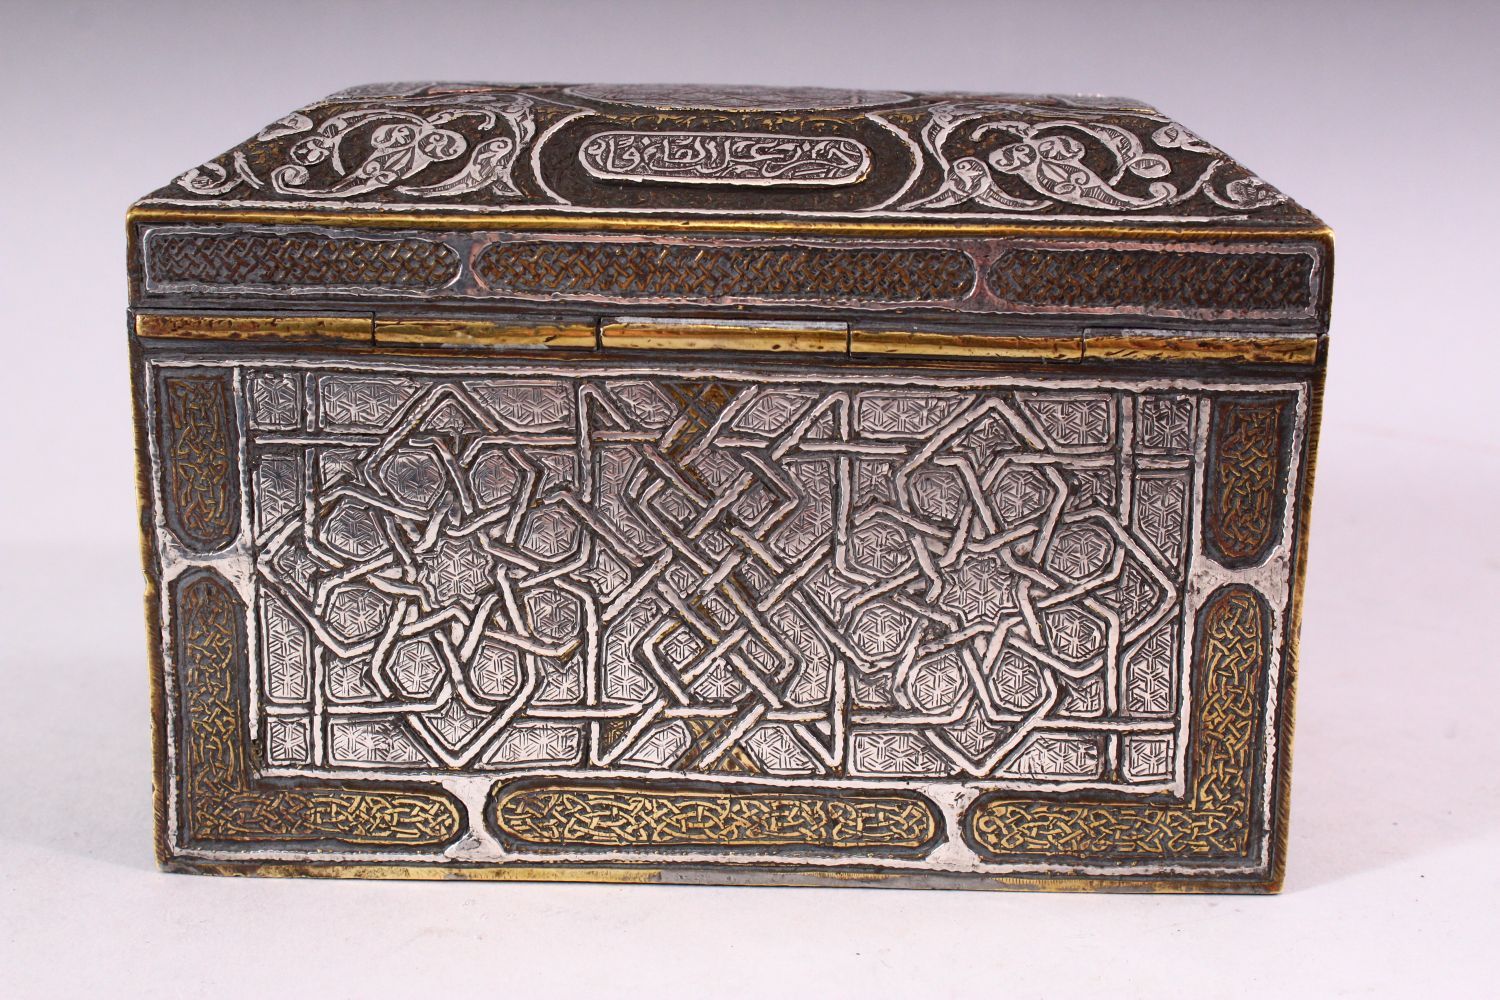 A GOOD 19TH CENTURY SYRIAN SILVER, COPPER AND BRASS RECTANGULAR CASKET, with panels of calligraphy - Image 6 of 10